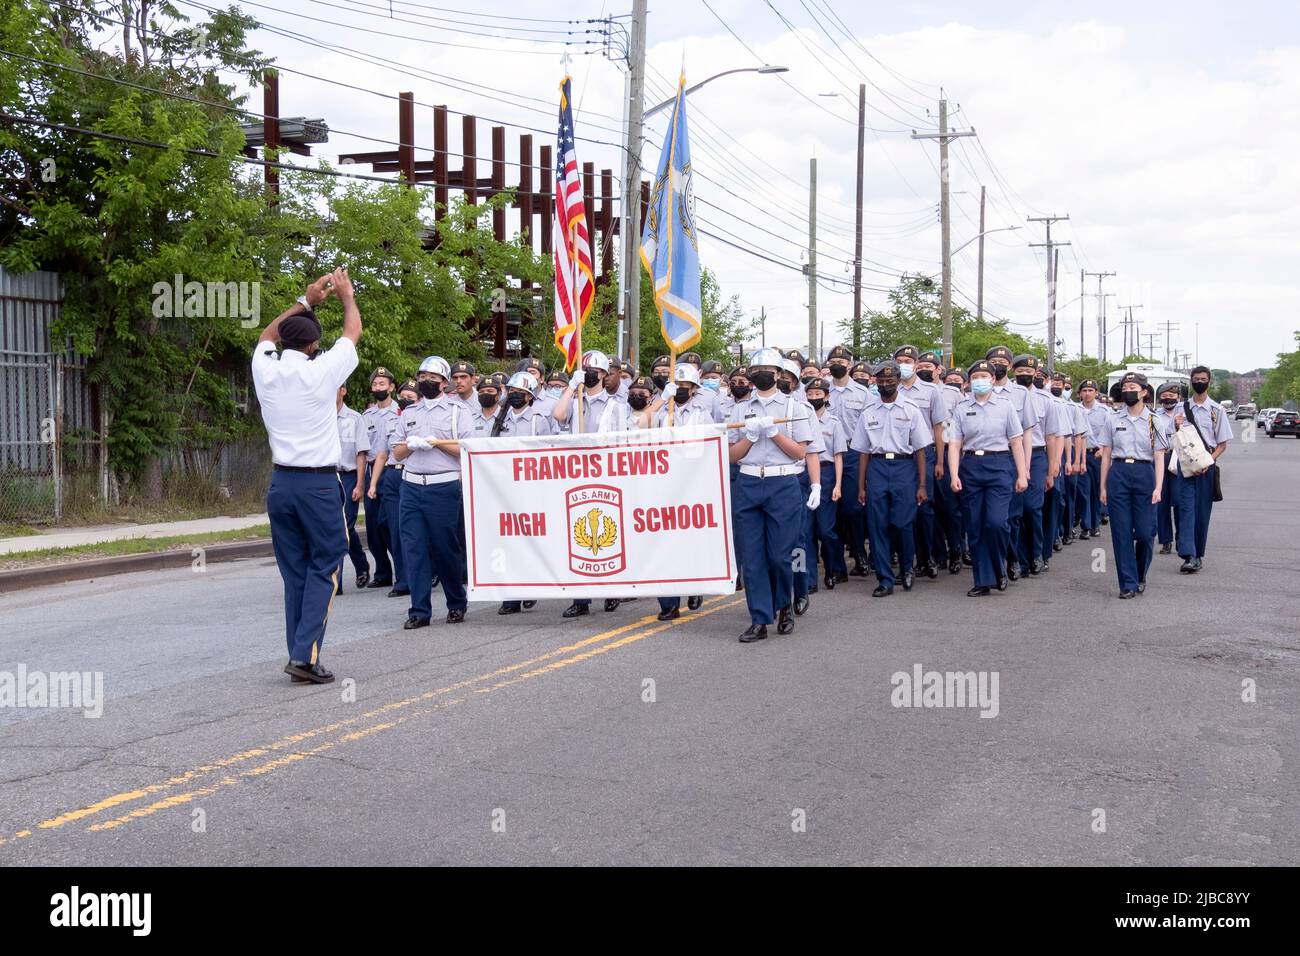 The Francis Lewis High School JrOTC marching in the College Point, Queens Memorial Day Parade. A diverse group of teens with most wearing masks. Stock Photo